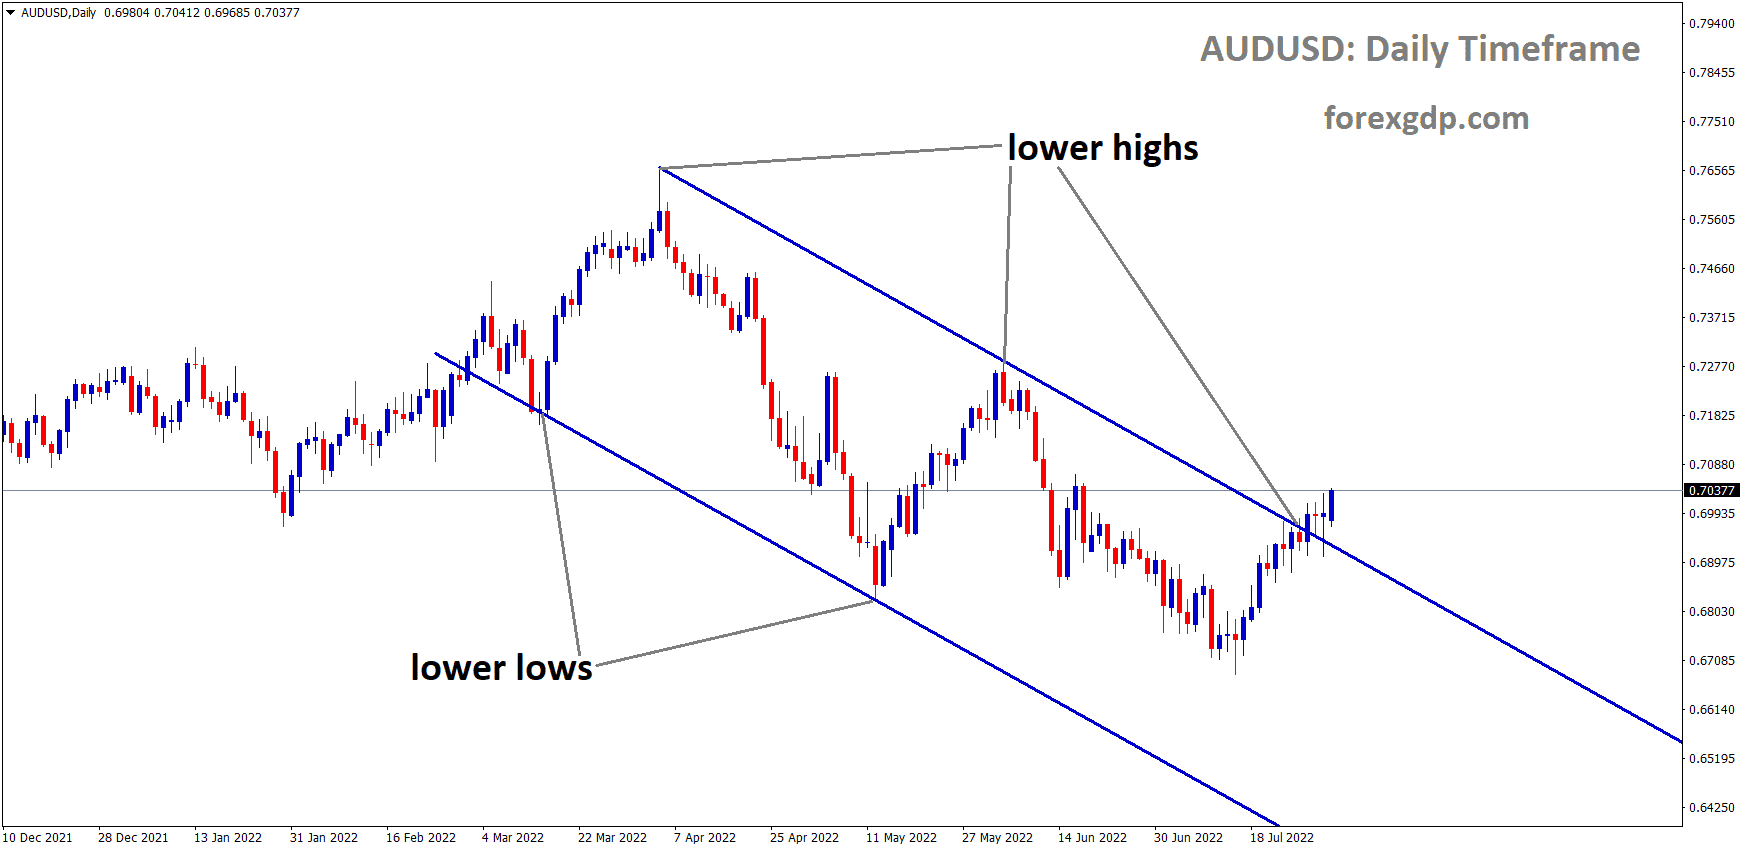 AUDUSD is moving in the descending channel and the market has reached the Lower high area of the channel